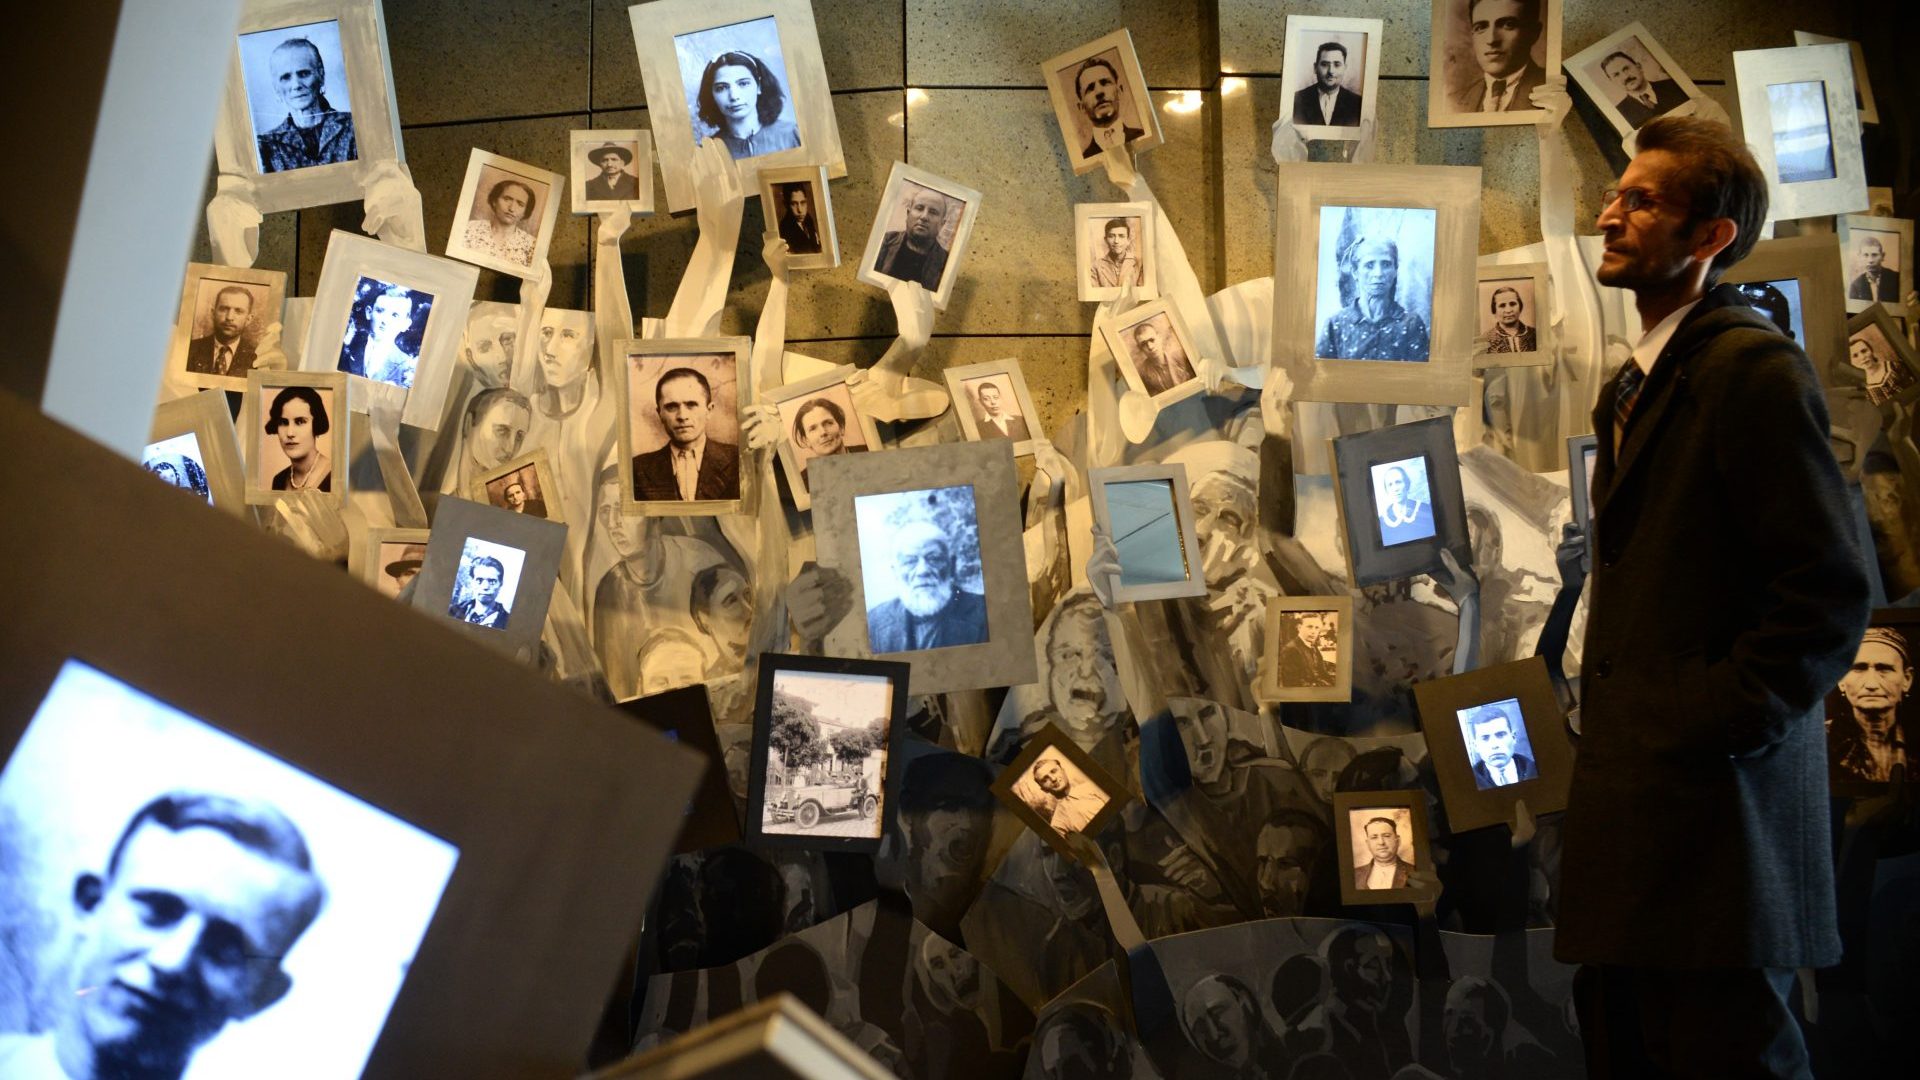 People visit an exhibition at Holocaust Museum during the Yom HaShoah - Holocaust Remembrance Day in Skopje. Photo: Nake Batev/Anadolu Agency/Getty Images